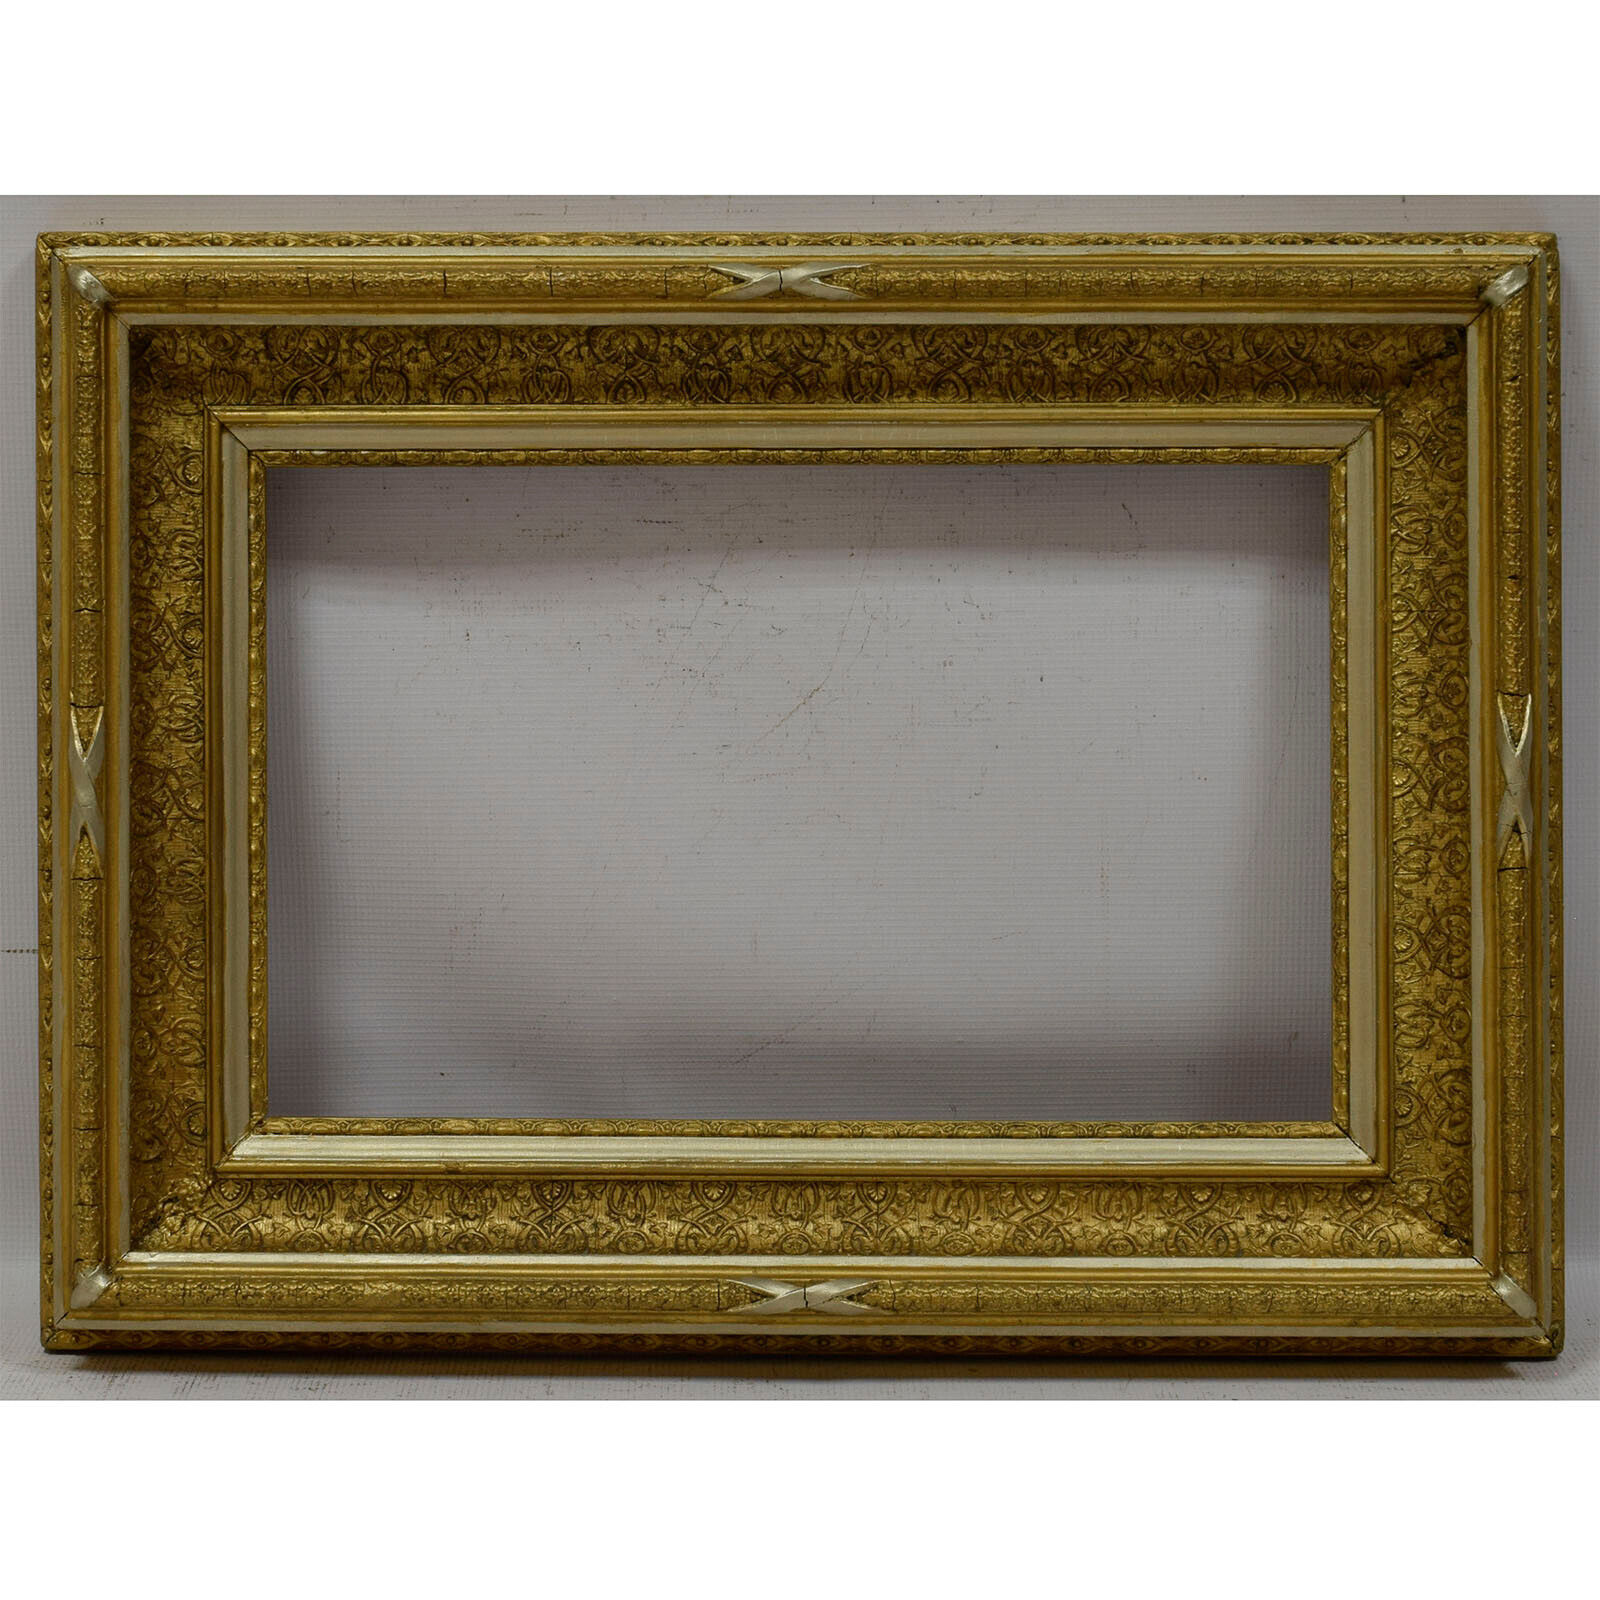 Ca.1850 Old wooden frame decorative original condition Internal: 18.5x11.4 in